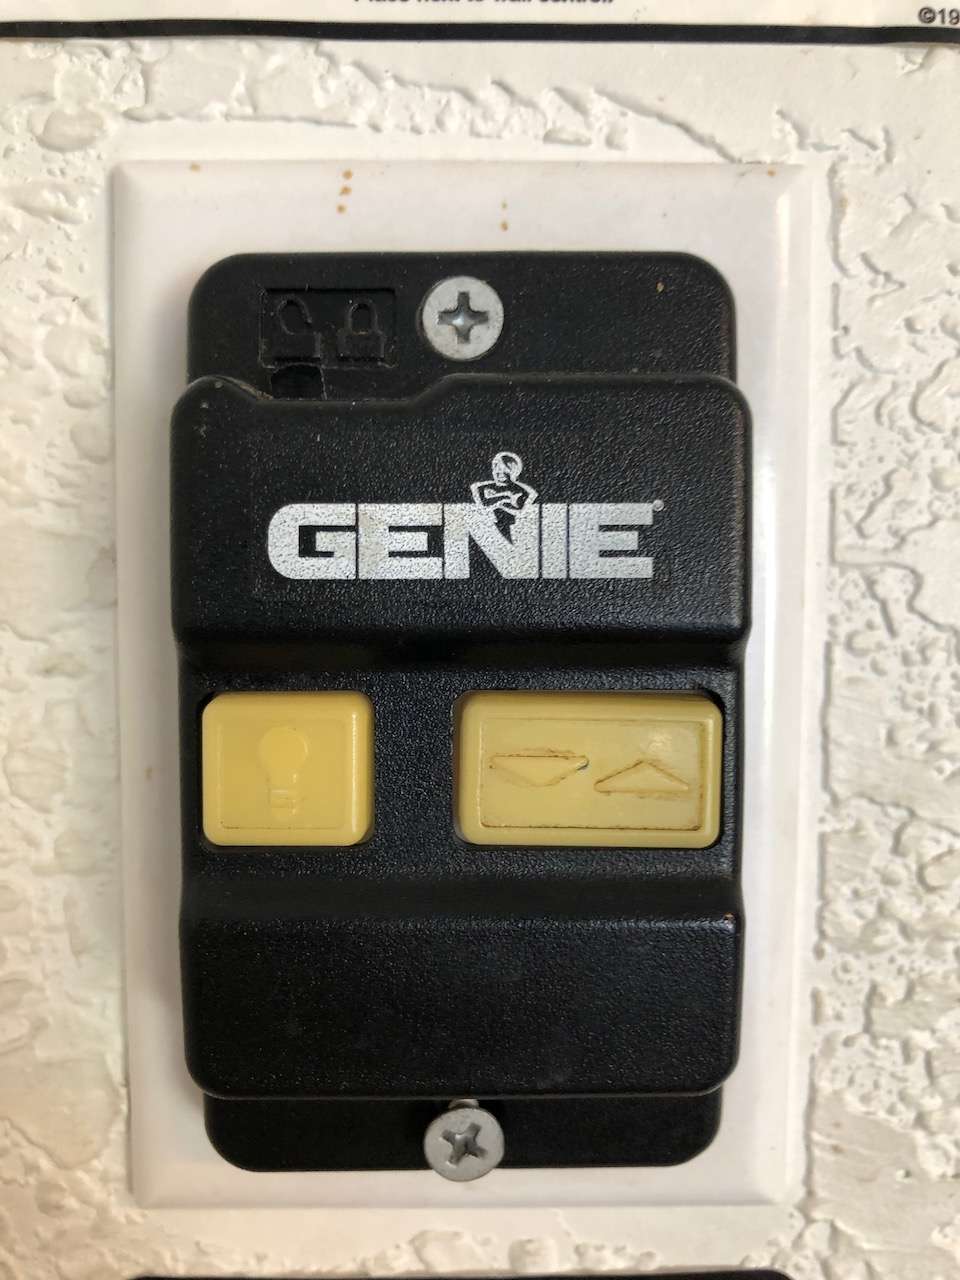 Older Series II Genie deluxe wall button. This unit is no longer manufactured, but sometimes can still be found online.